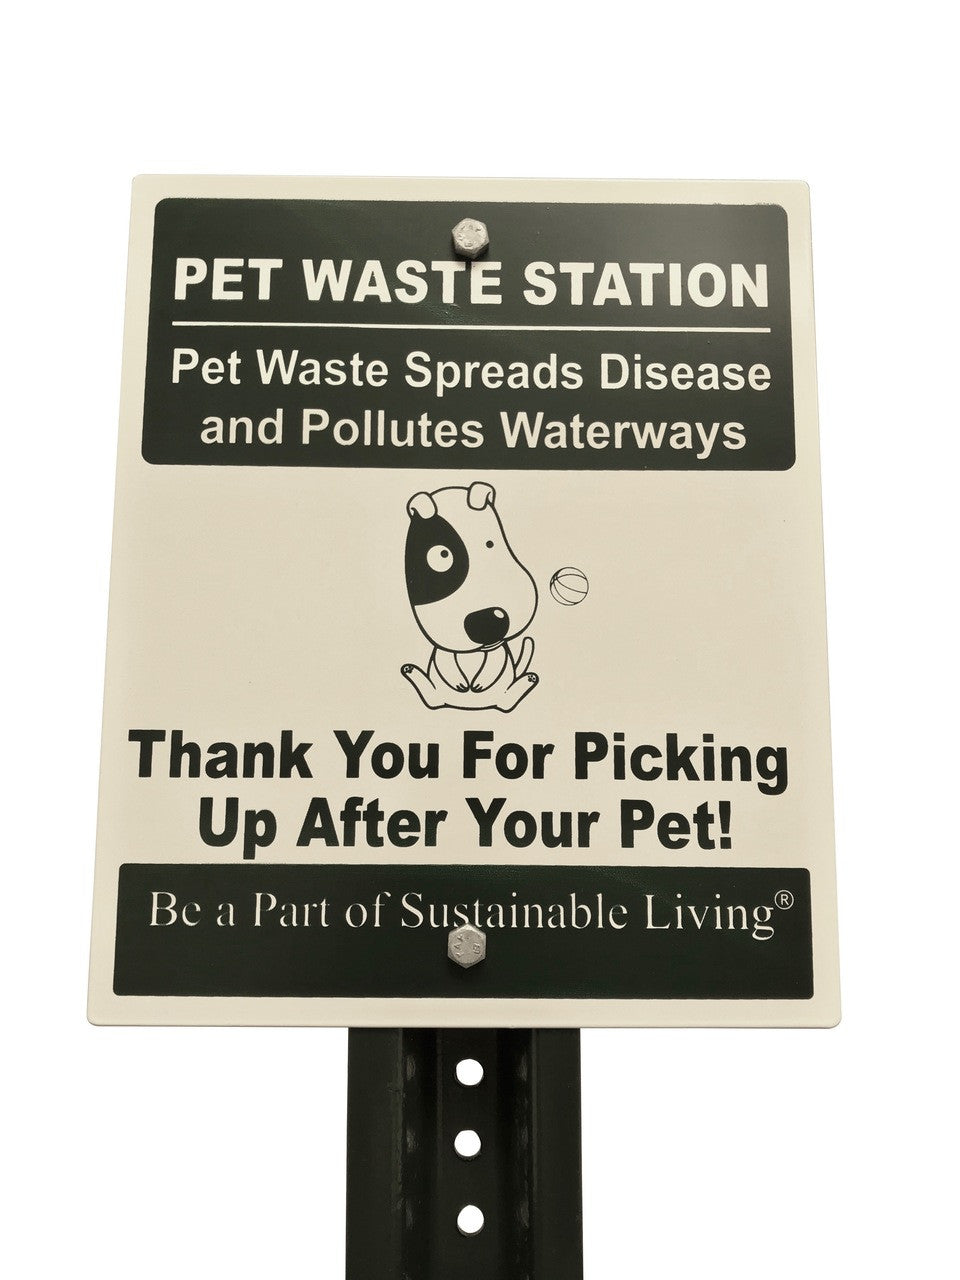 Poop bags Sign

No company name or logo on sign to make accessible to all properties